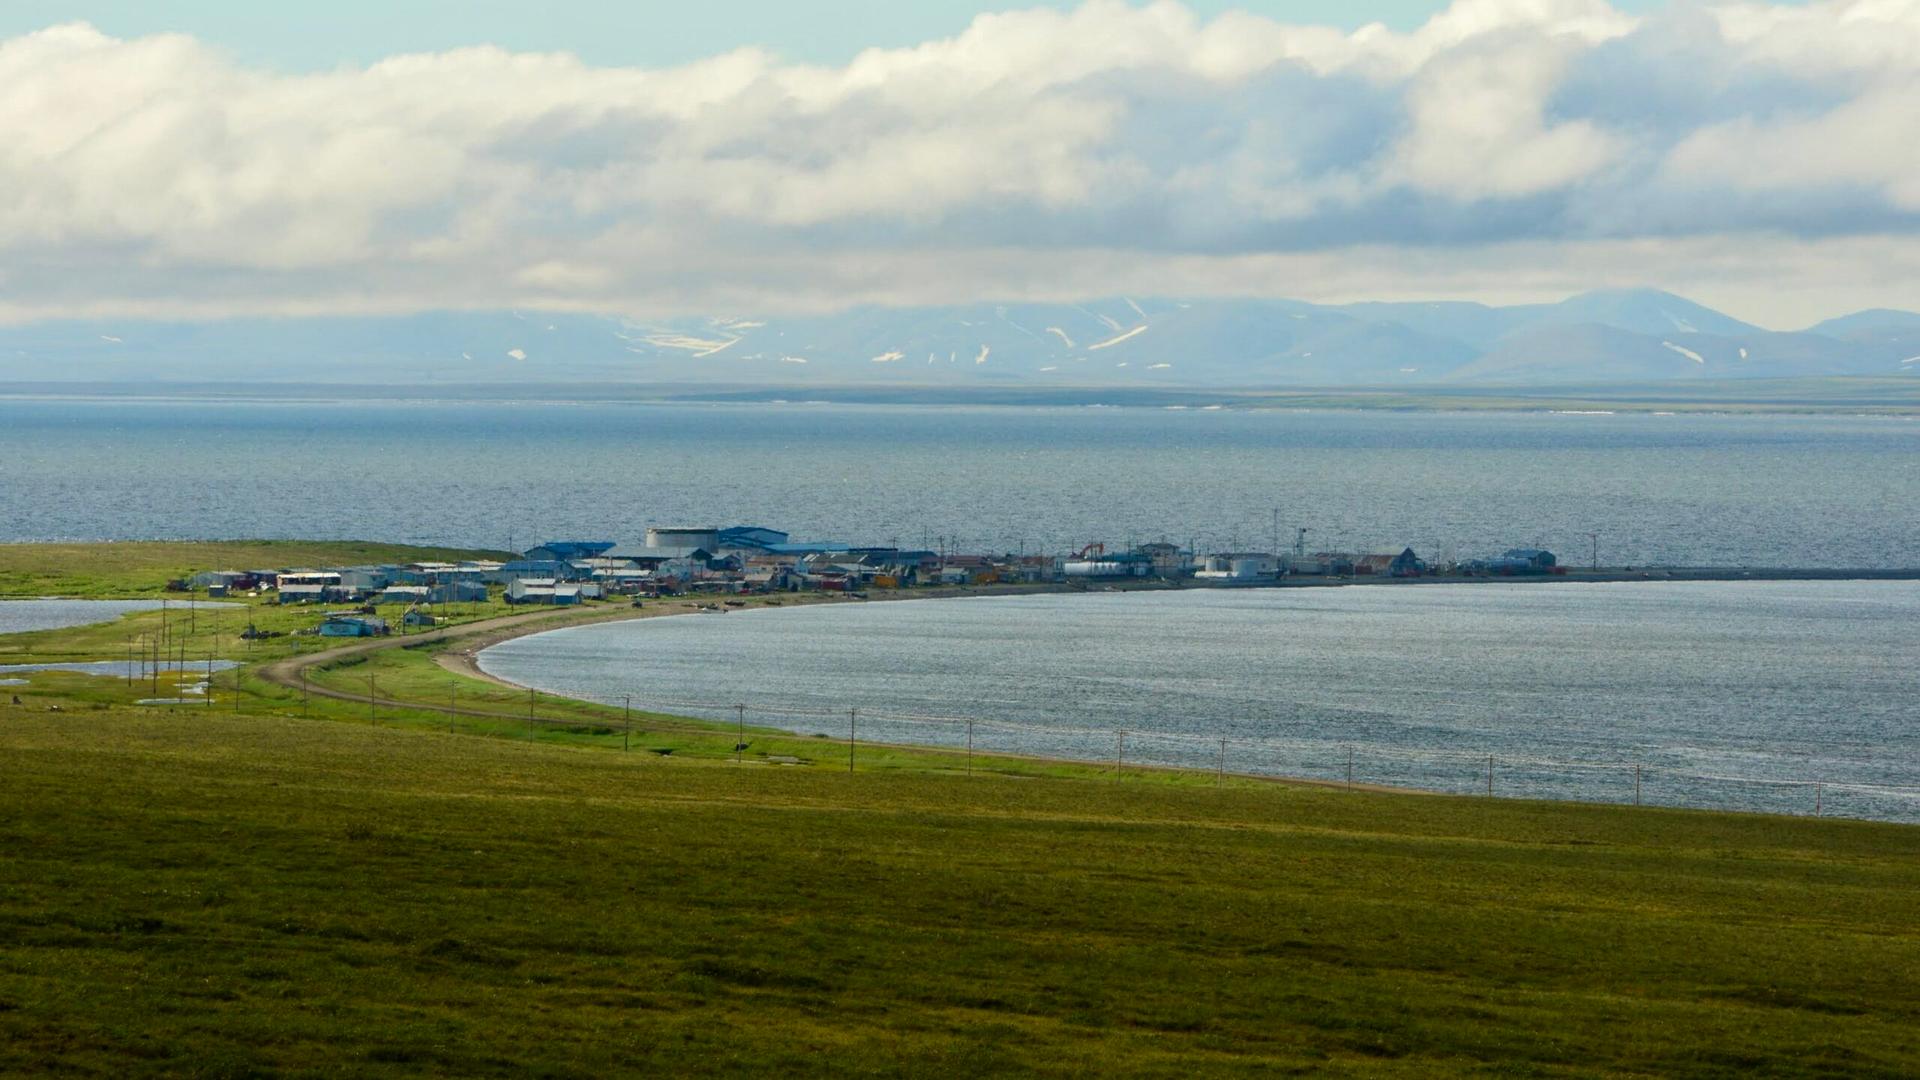 The traditional Iñupiaq village of Teller sits on a long spit of land separating two bodies of water off Western Alaska’s Seward Peninsula. 